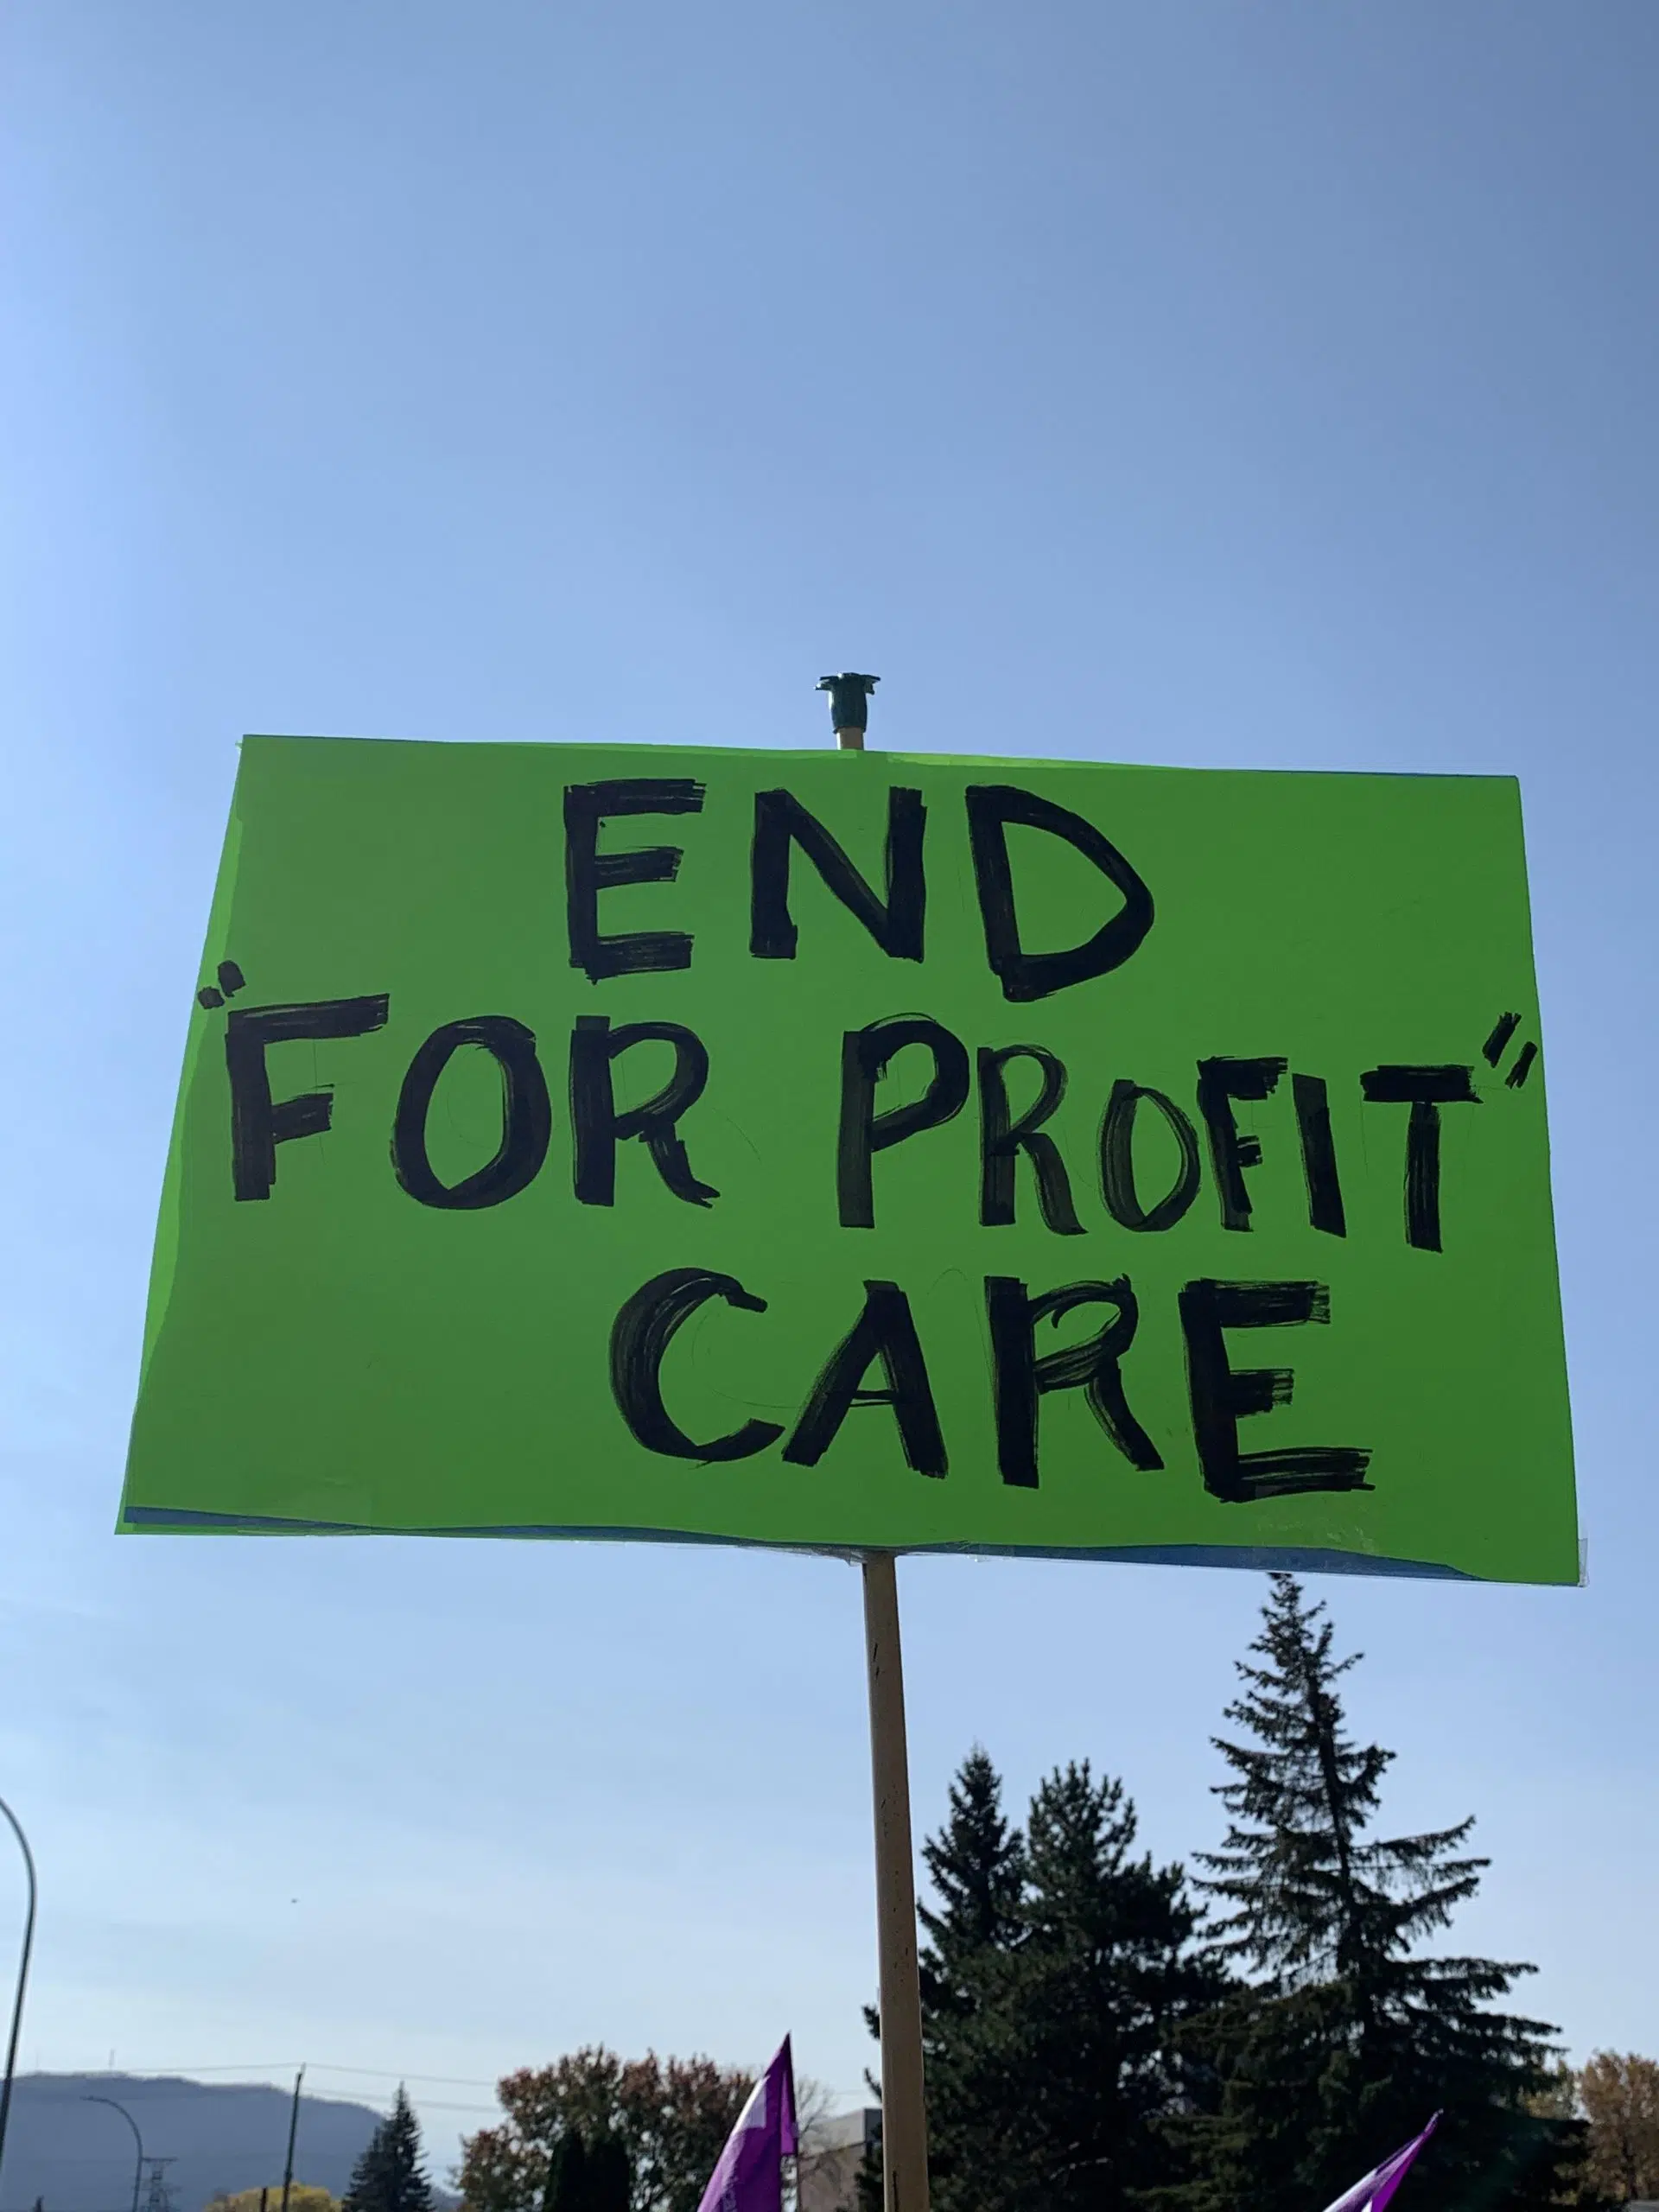 Province Wide Protests Against LTC Home Conditions